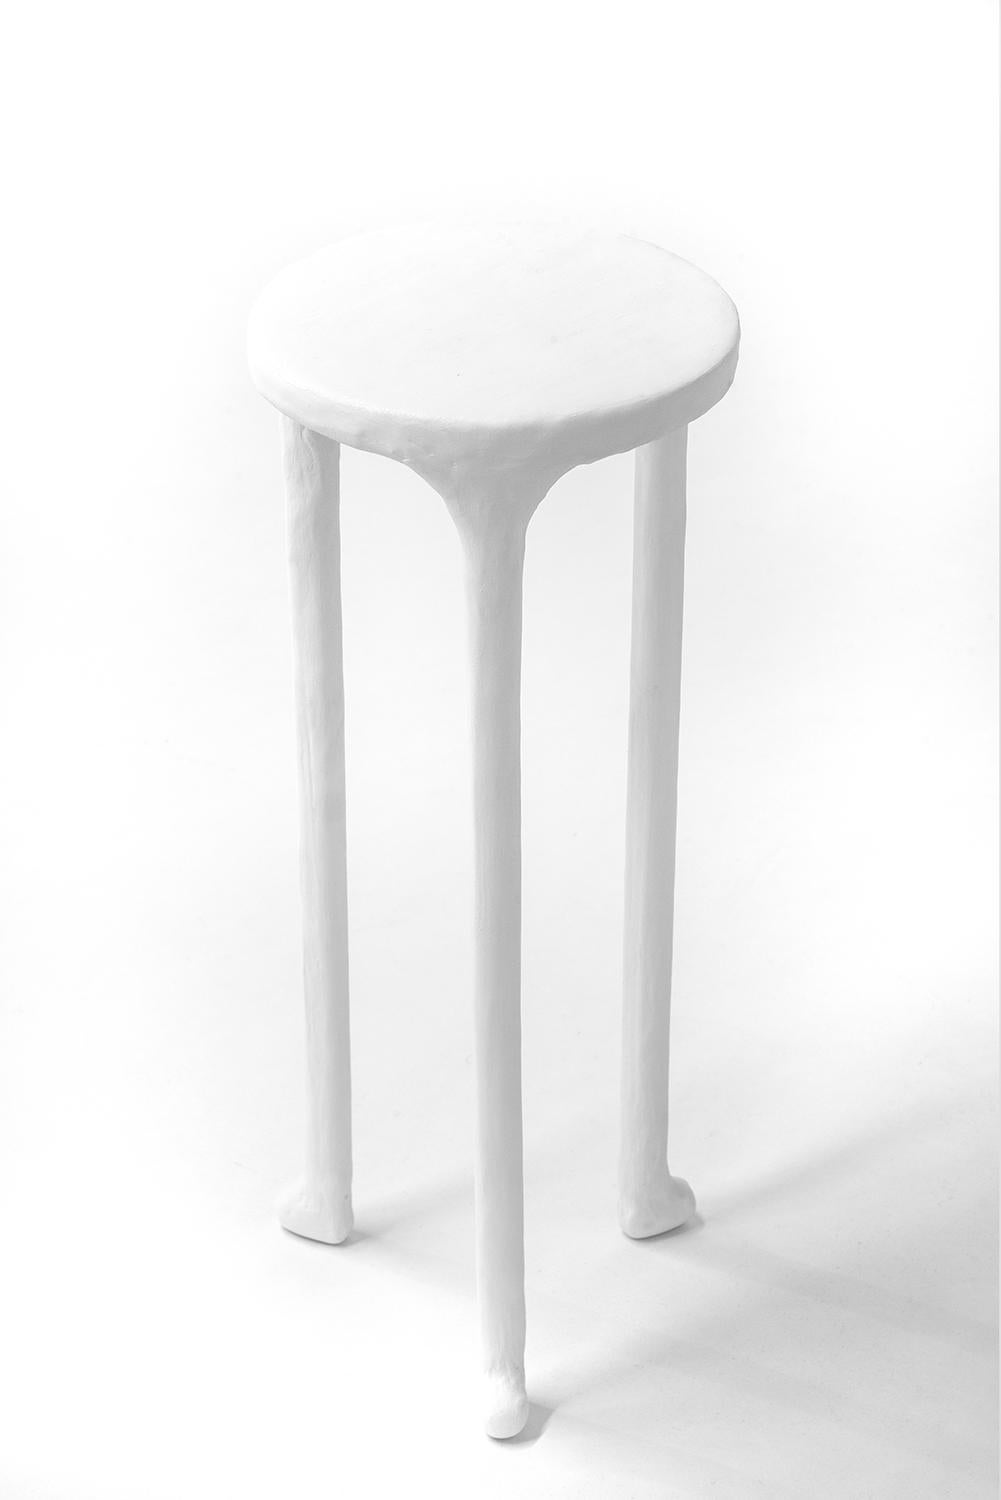 American Side Table Classic Modern White Plaster and Steel Minimalist Hand-Shaped Contemp For Sale